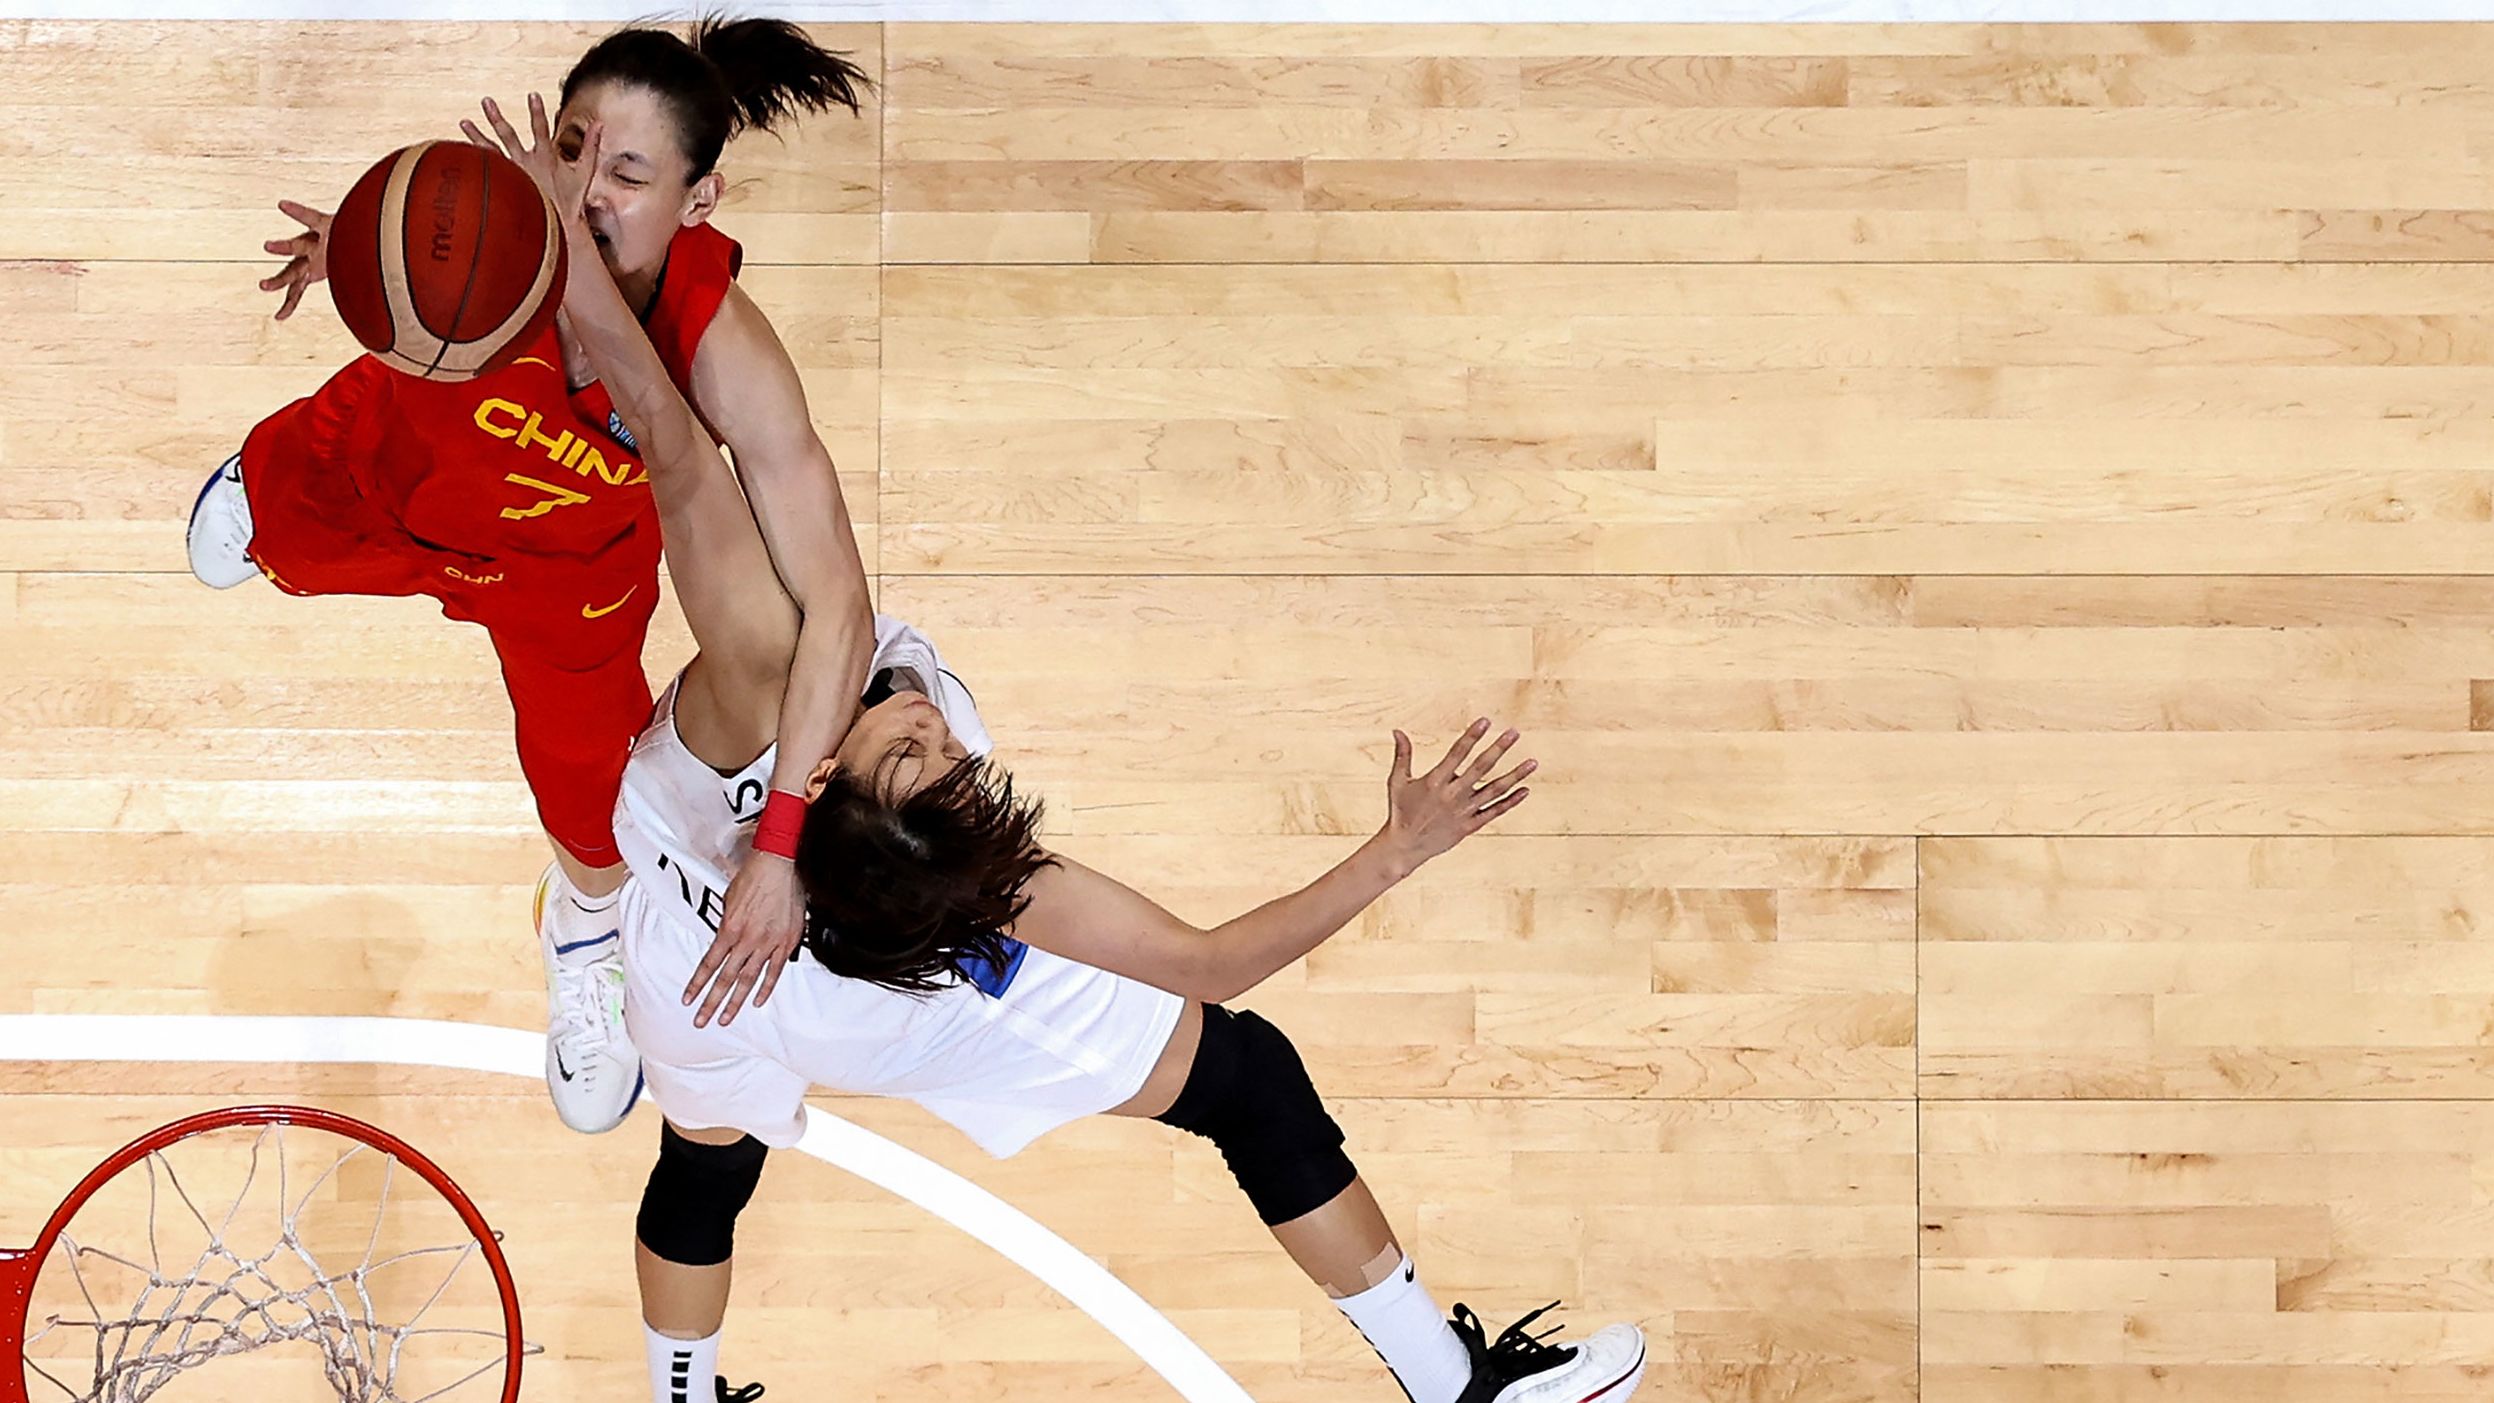 China's Yang Liwei shoots over a South Korean player during a World Cup basketball game in Sydney on Thursday, September 22.